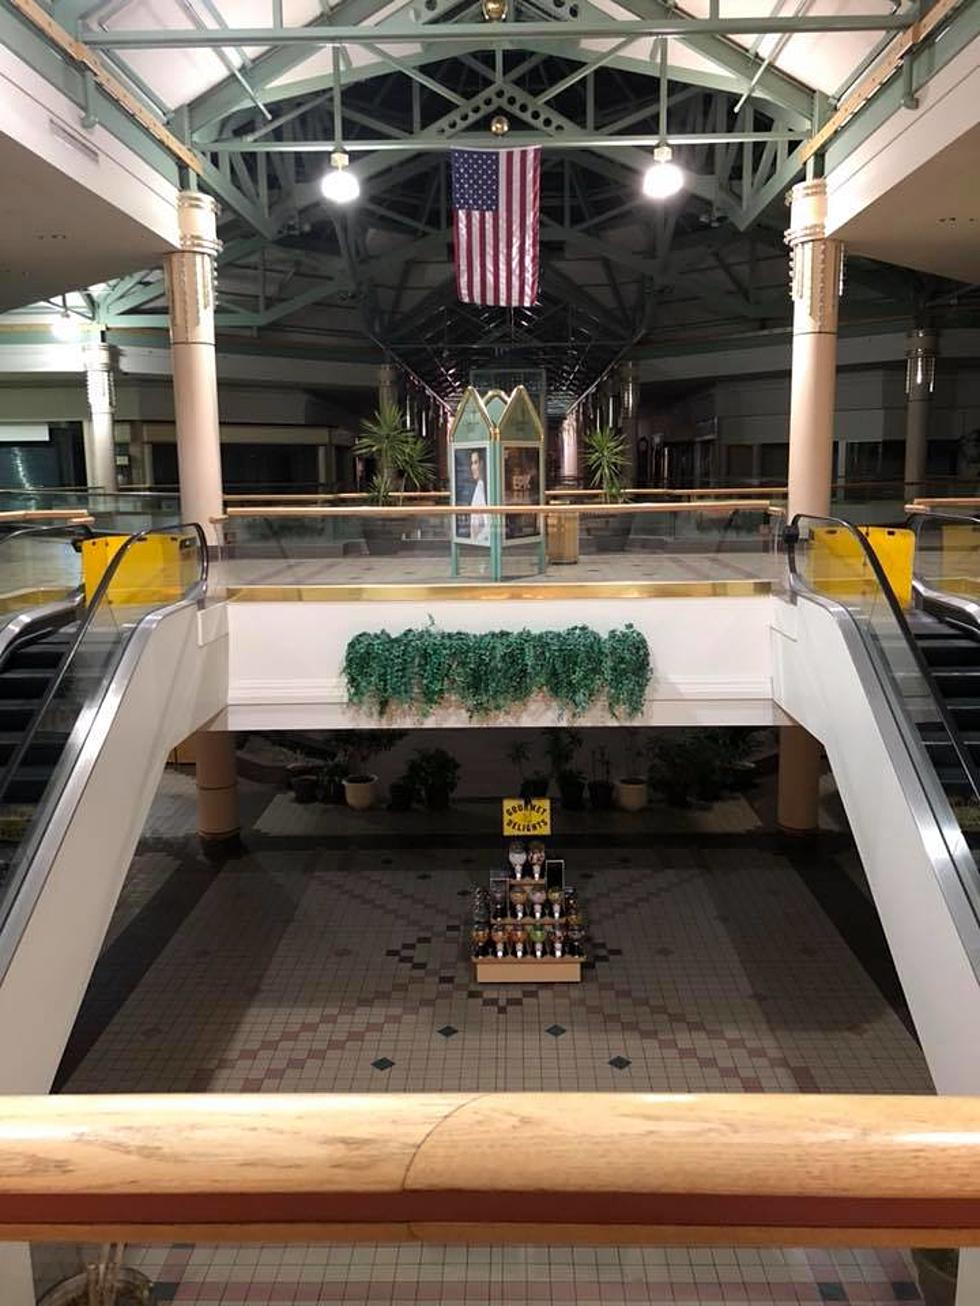 Closed For Good, Take A Look Inside Of This Northern Illinois Abandoned Mall